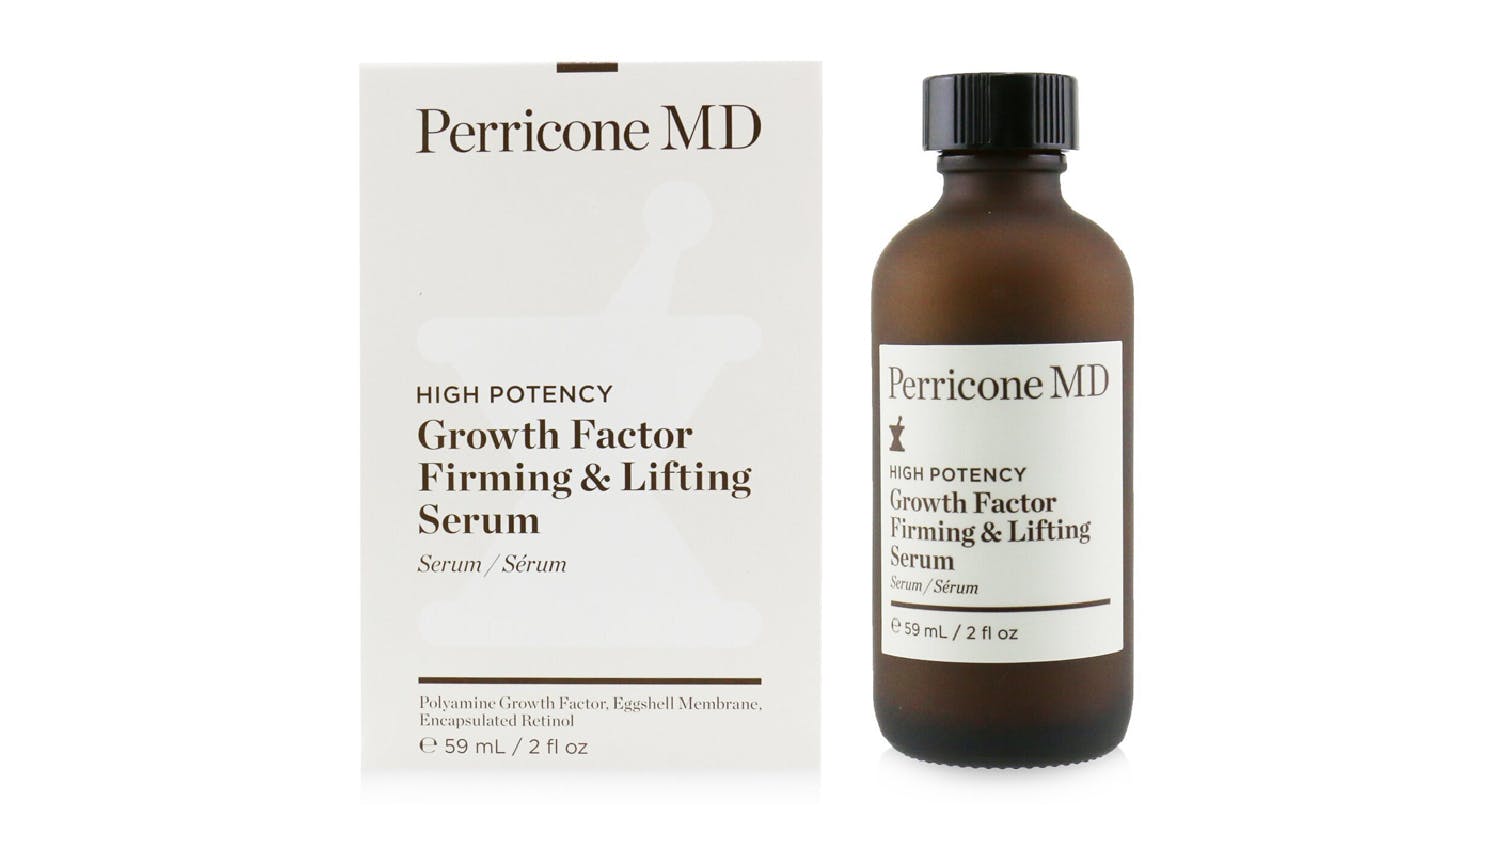 Perricone MD High Potency Growth Factor Firming and Lifting Serum - 59ml/2oz